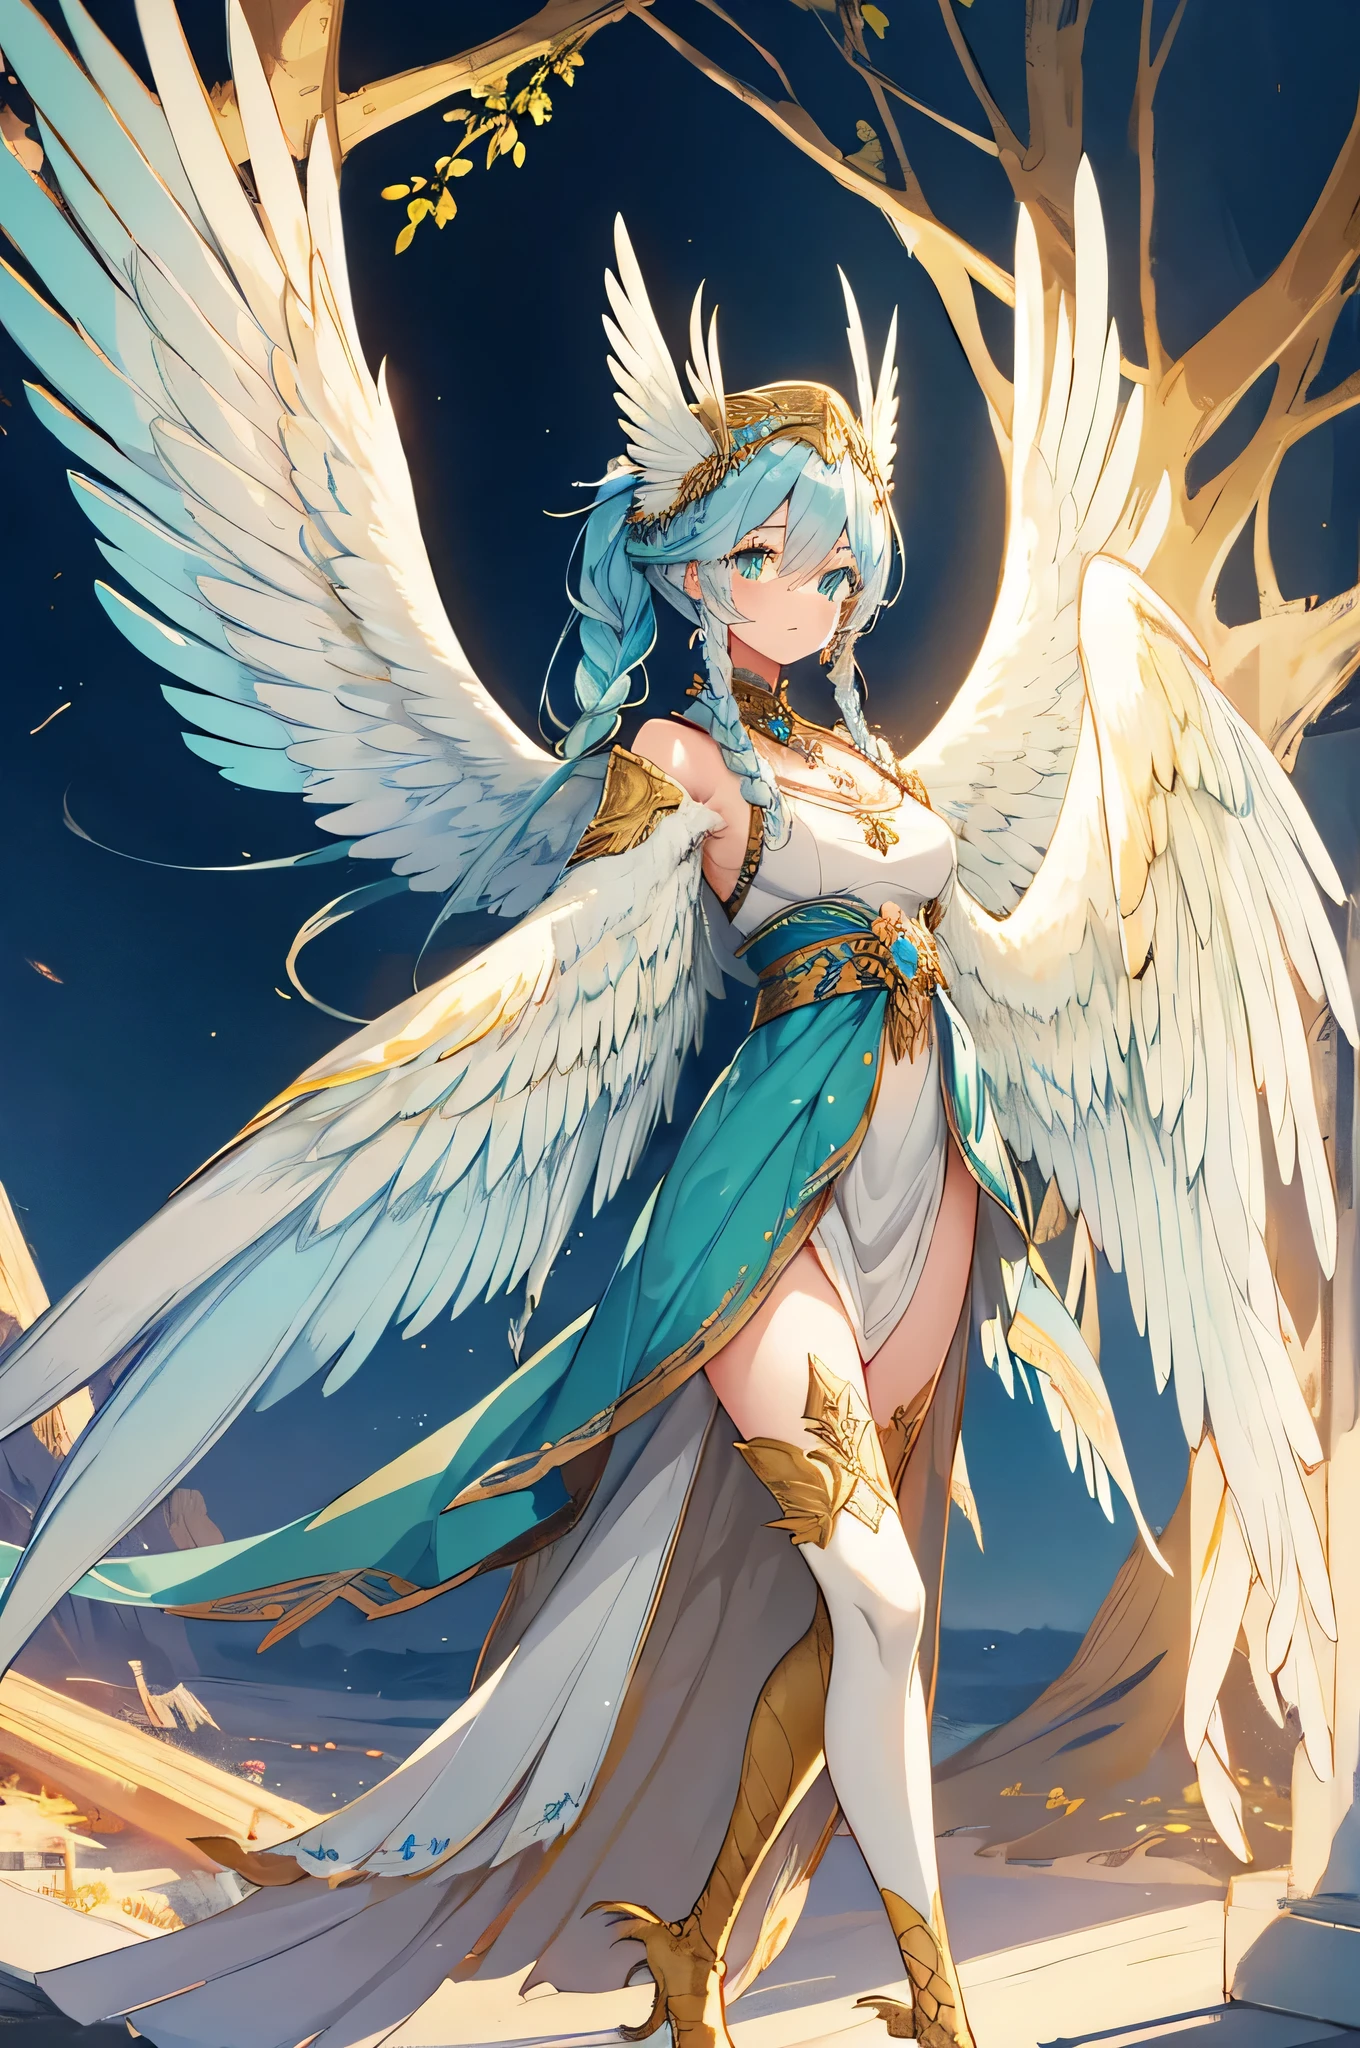 4k,High resolution,One Woman,Harpy,Light blue hair,Long Ponytail,Braid,Green Eyes,White Wings,Golden toenails,Valkyrie,White Holy Dress,Winged headgear,Jewelry decoration,Gold decoration,Temple in the Sky,Aurora Background